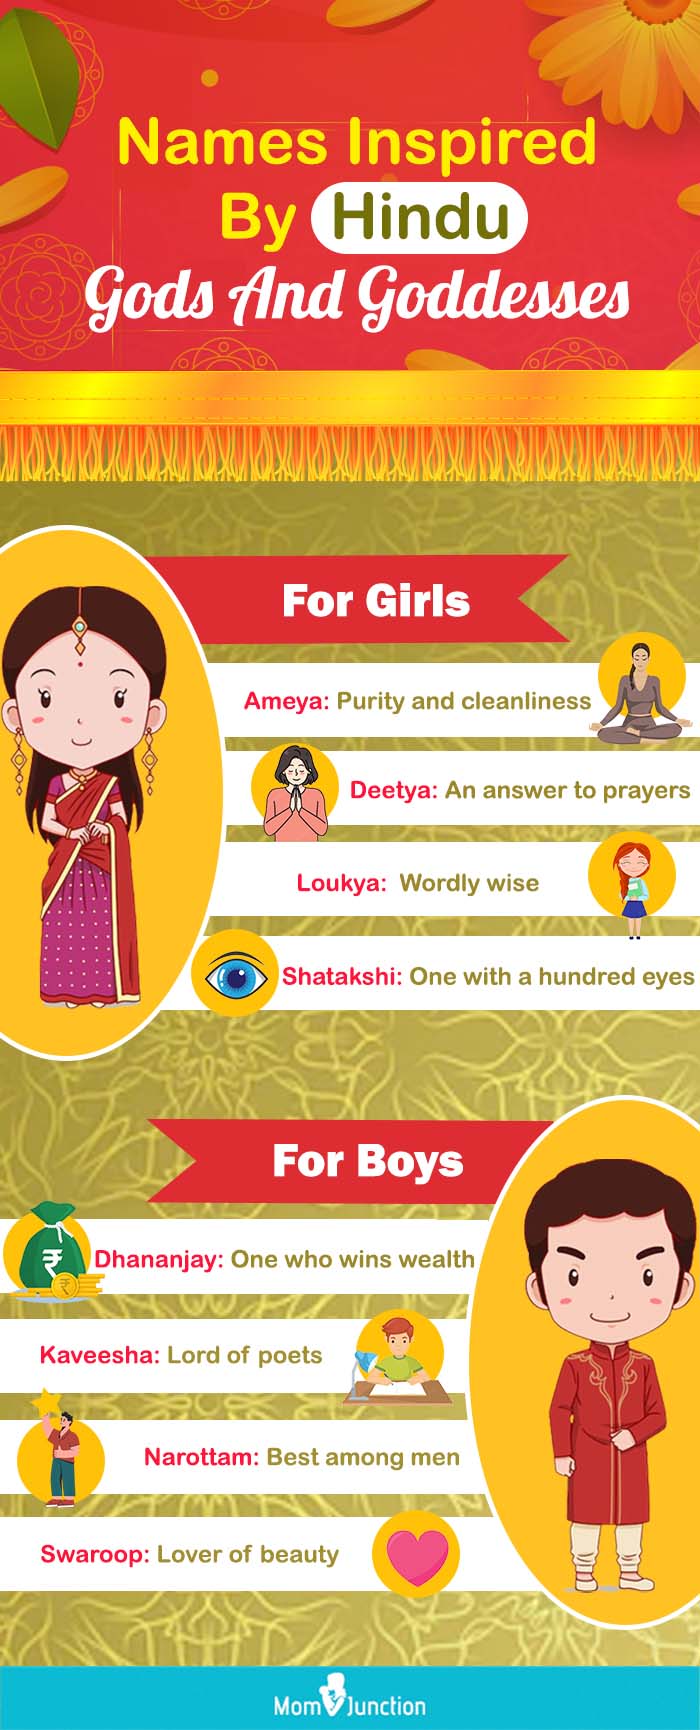 names inspired by hindu gods and goddesses (infographic)